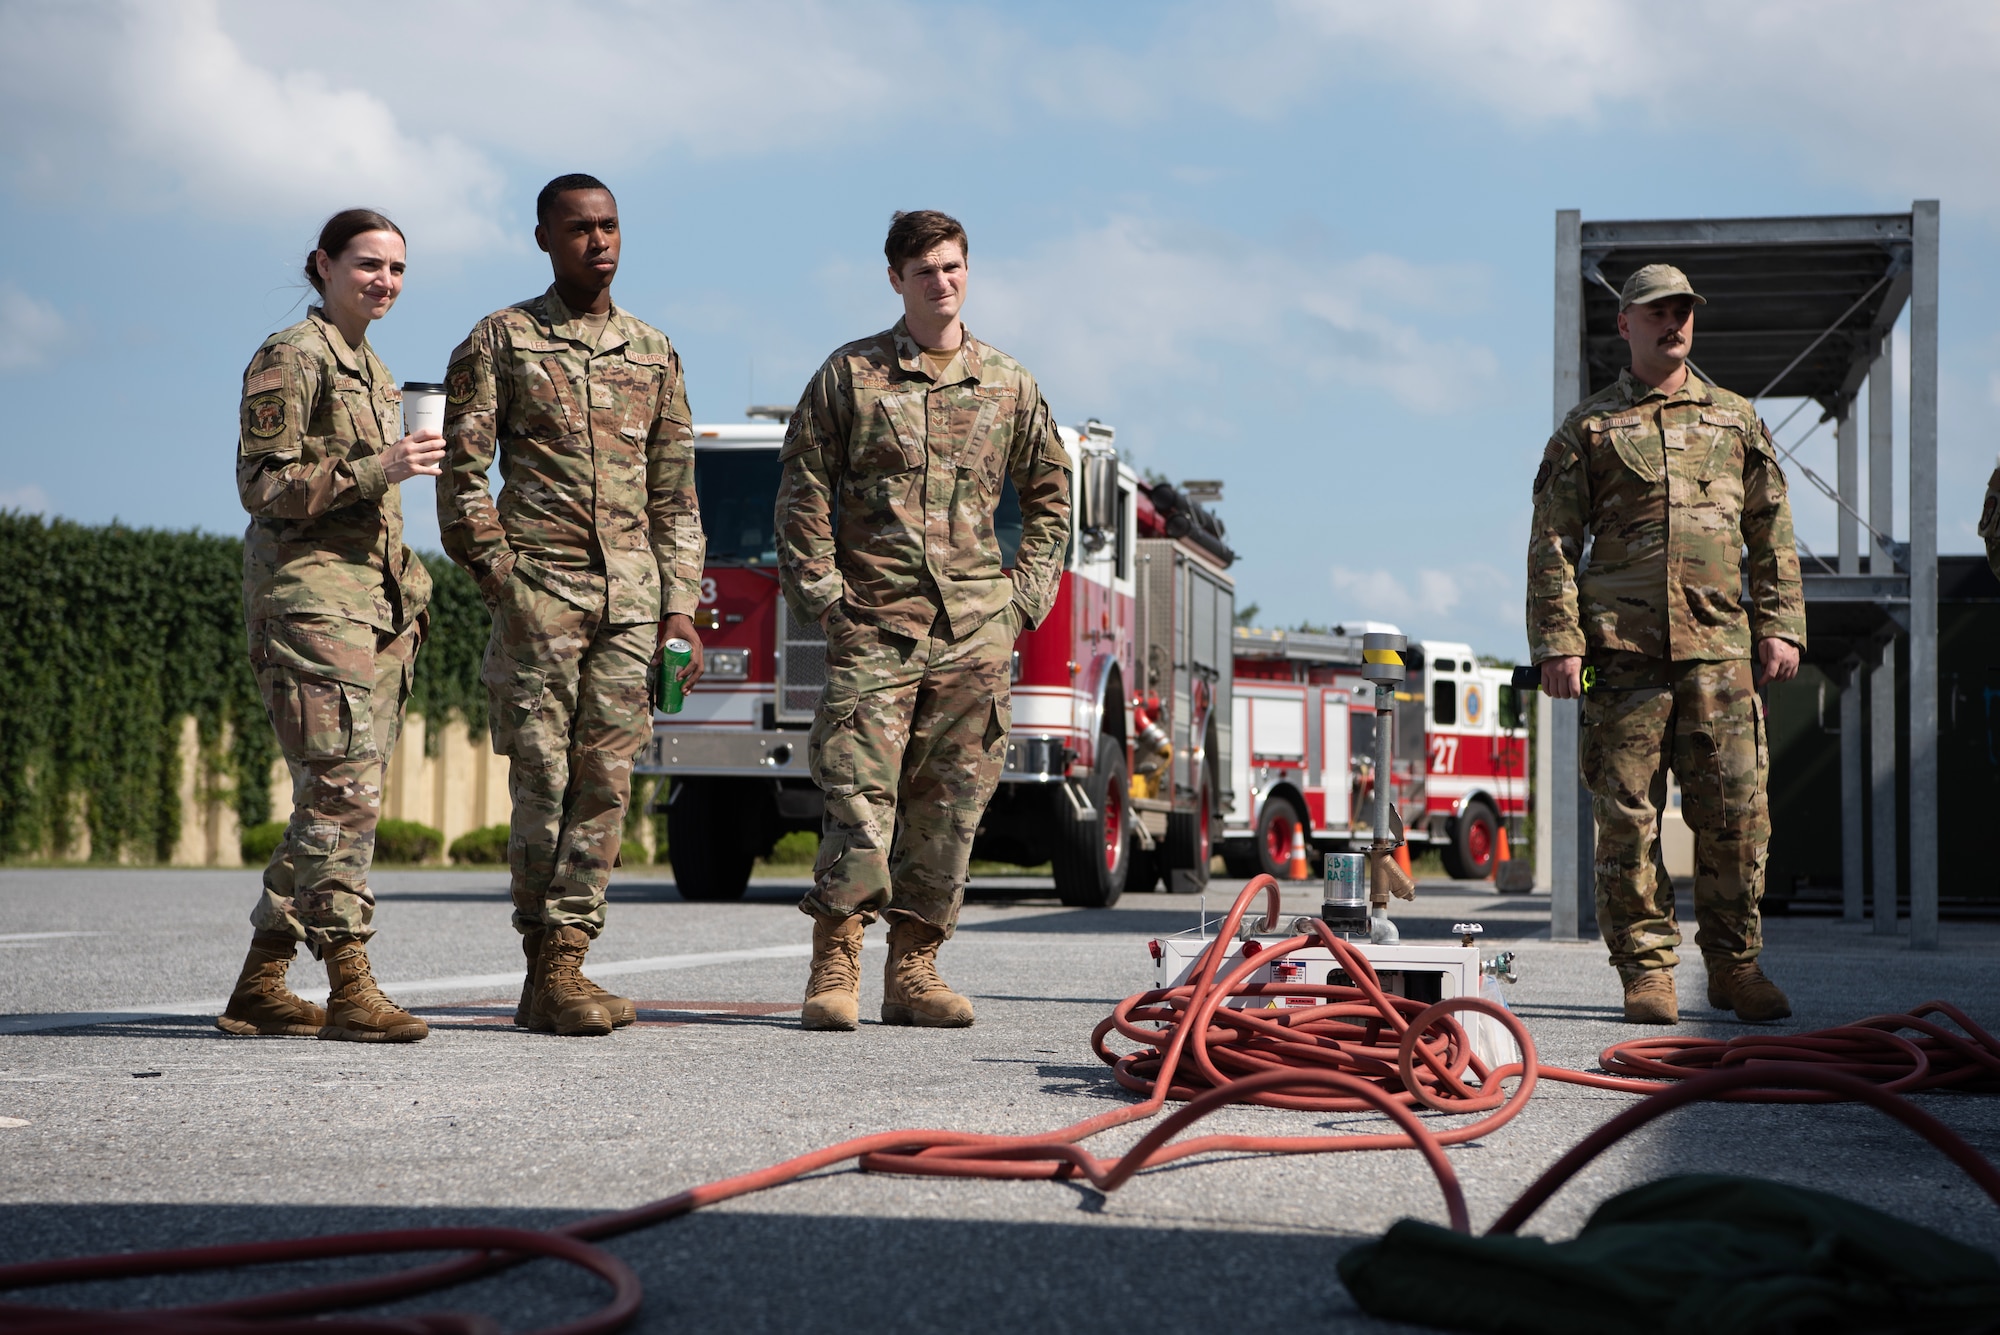 Airmen observe extraction demonstration in front of firetrucks